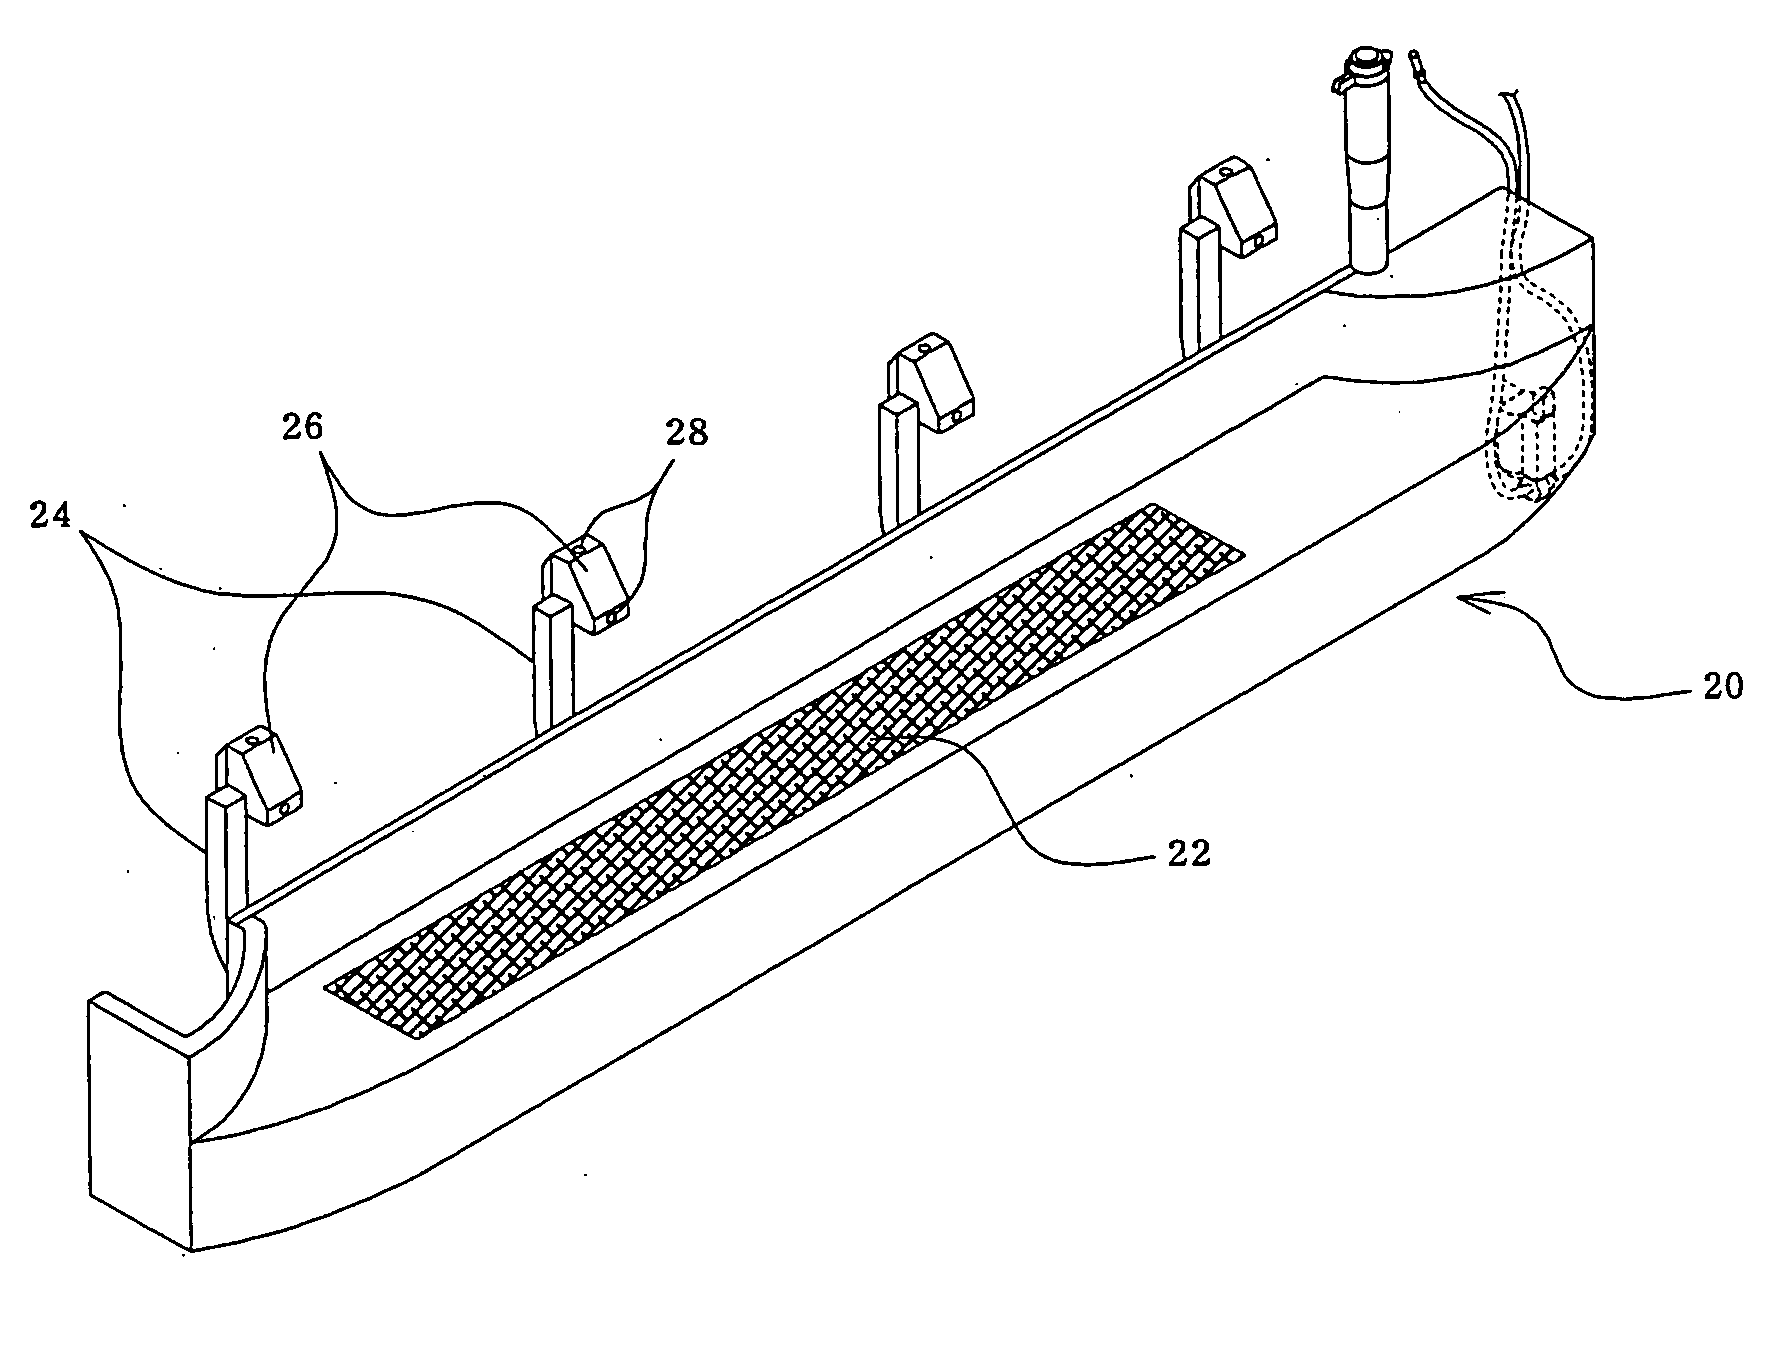 Windshield washer fluid reservoir tank device for vehicles